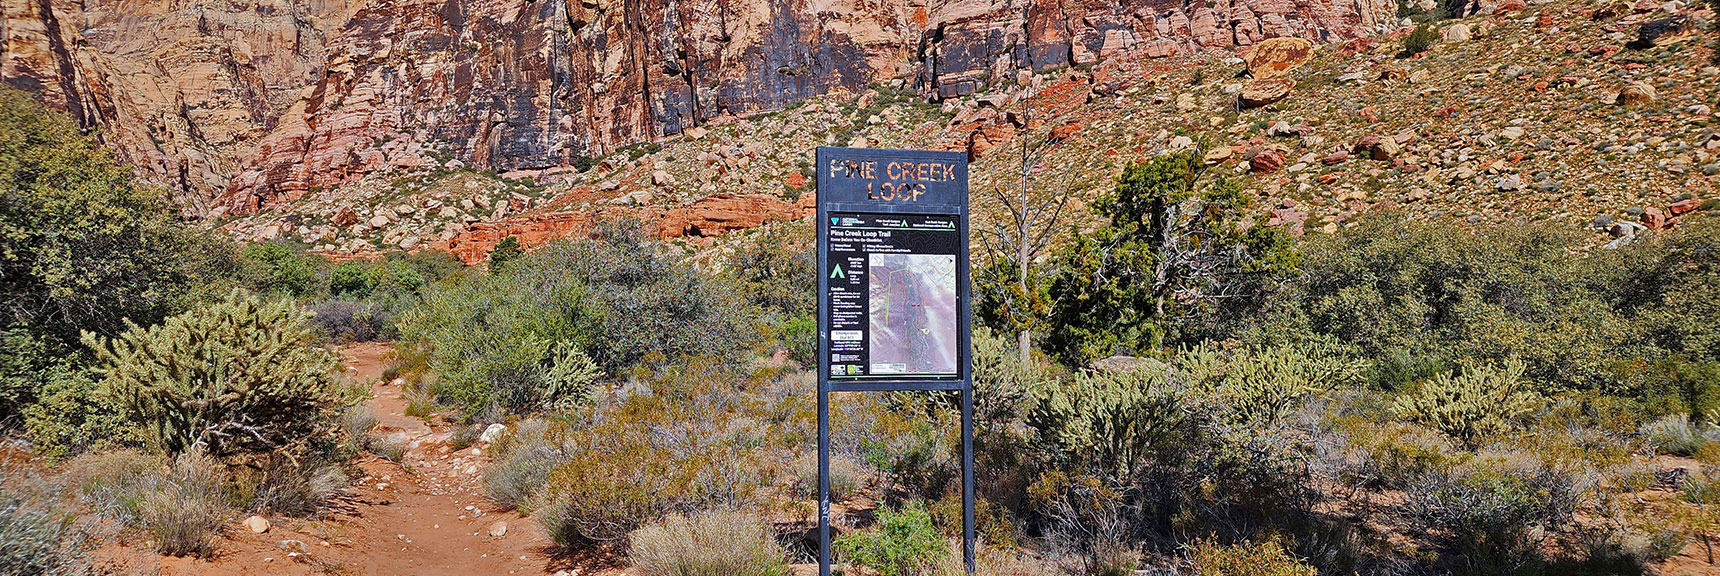 Entrance to Pine Creek Loop at Knoll Northern Trailhead | Knoll Trail | Red Rock Canyon National Conservation Area, Nevada | David Smith | LasVegasAreaTrails.com